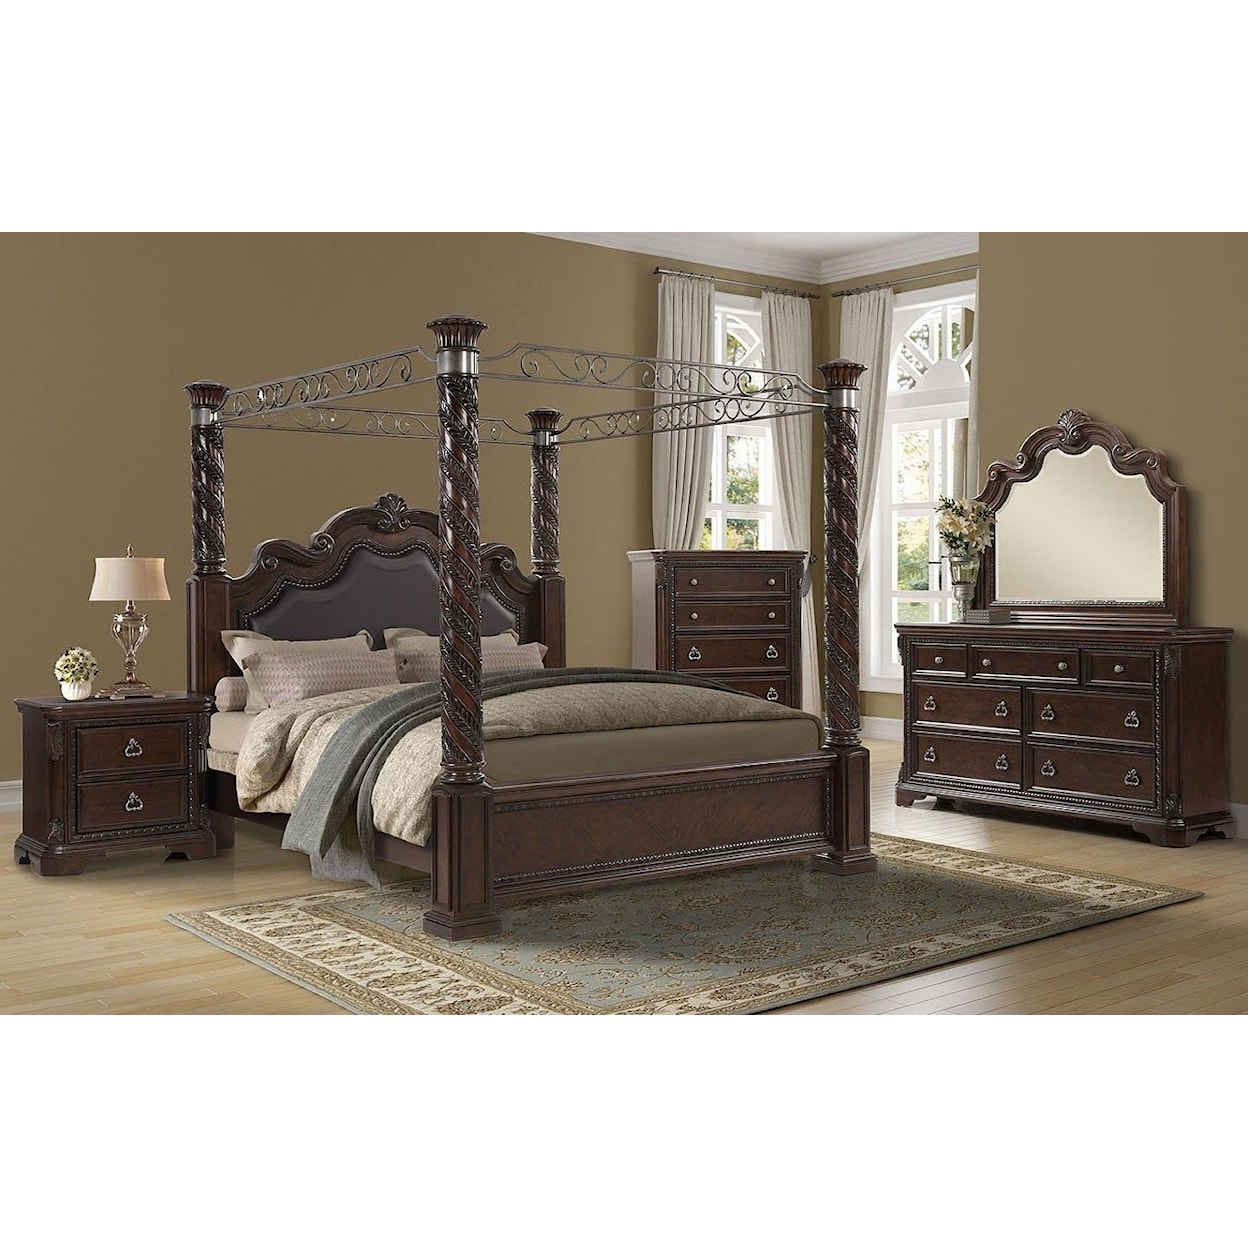 Bernards Coventry Queen Canopy Bed